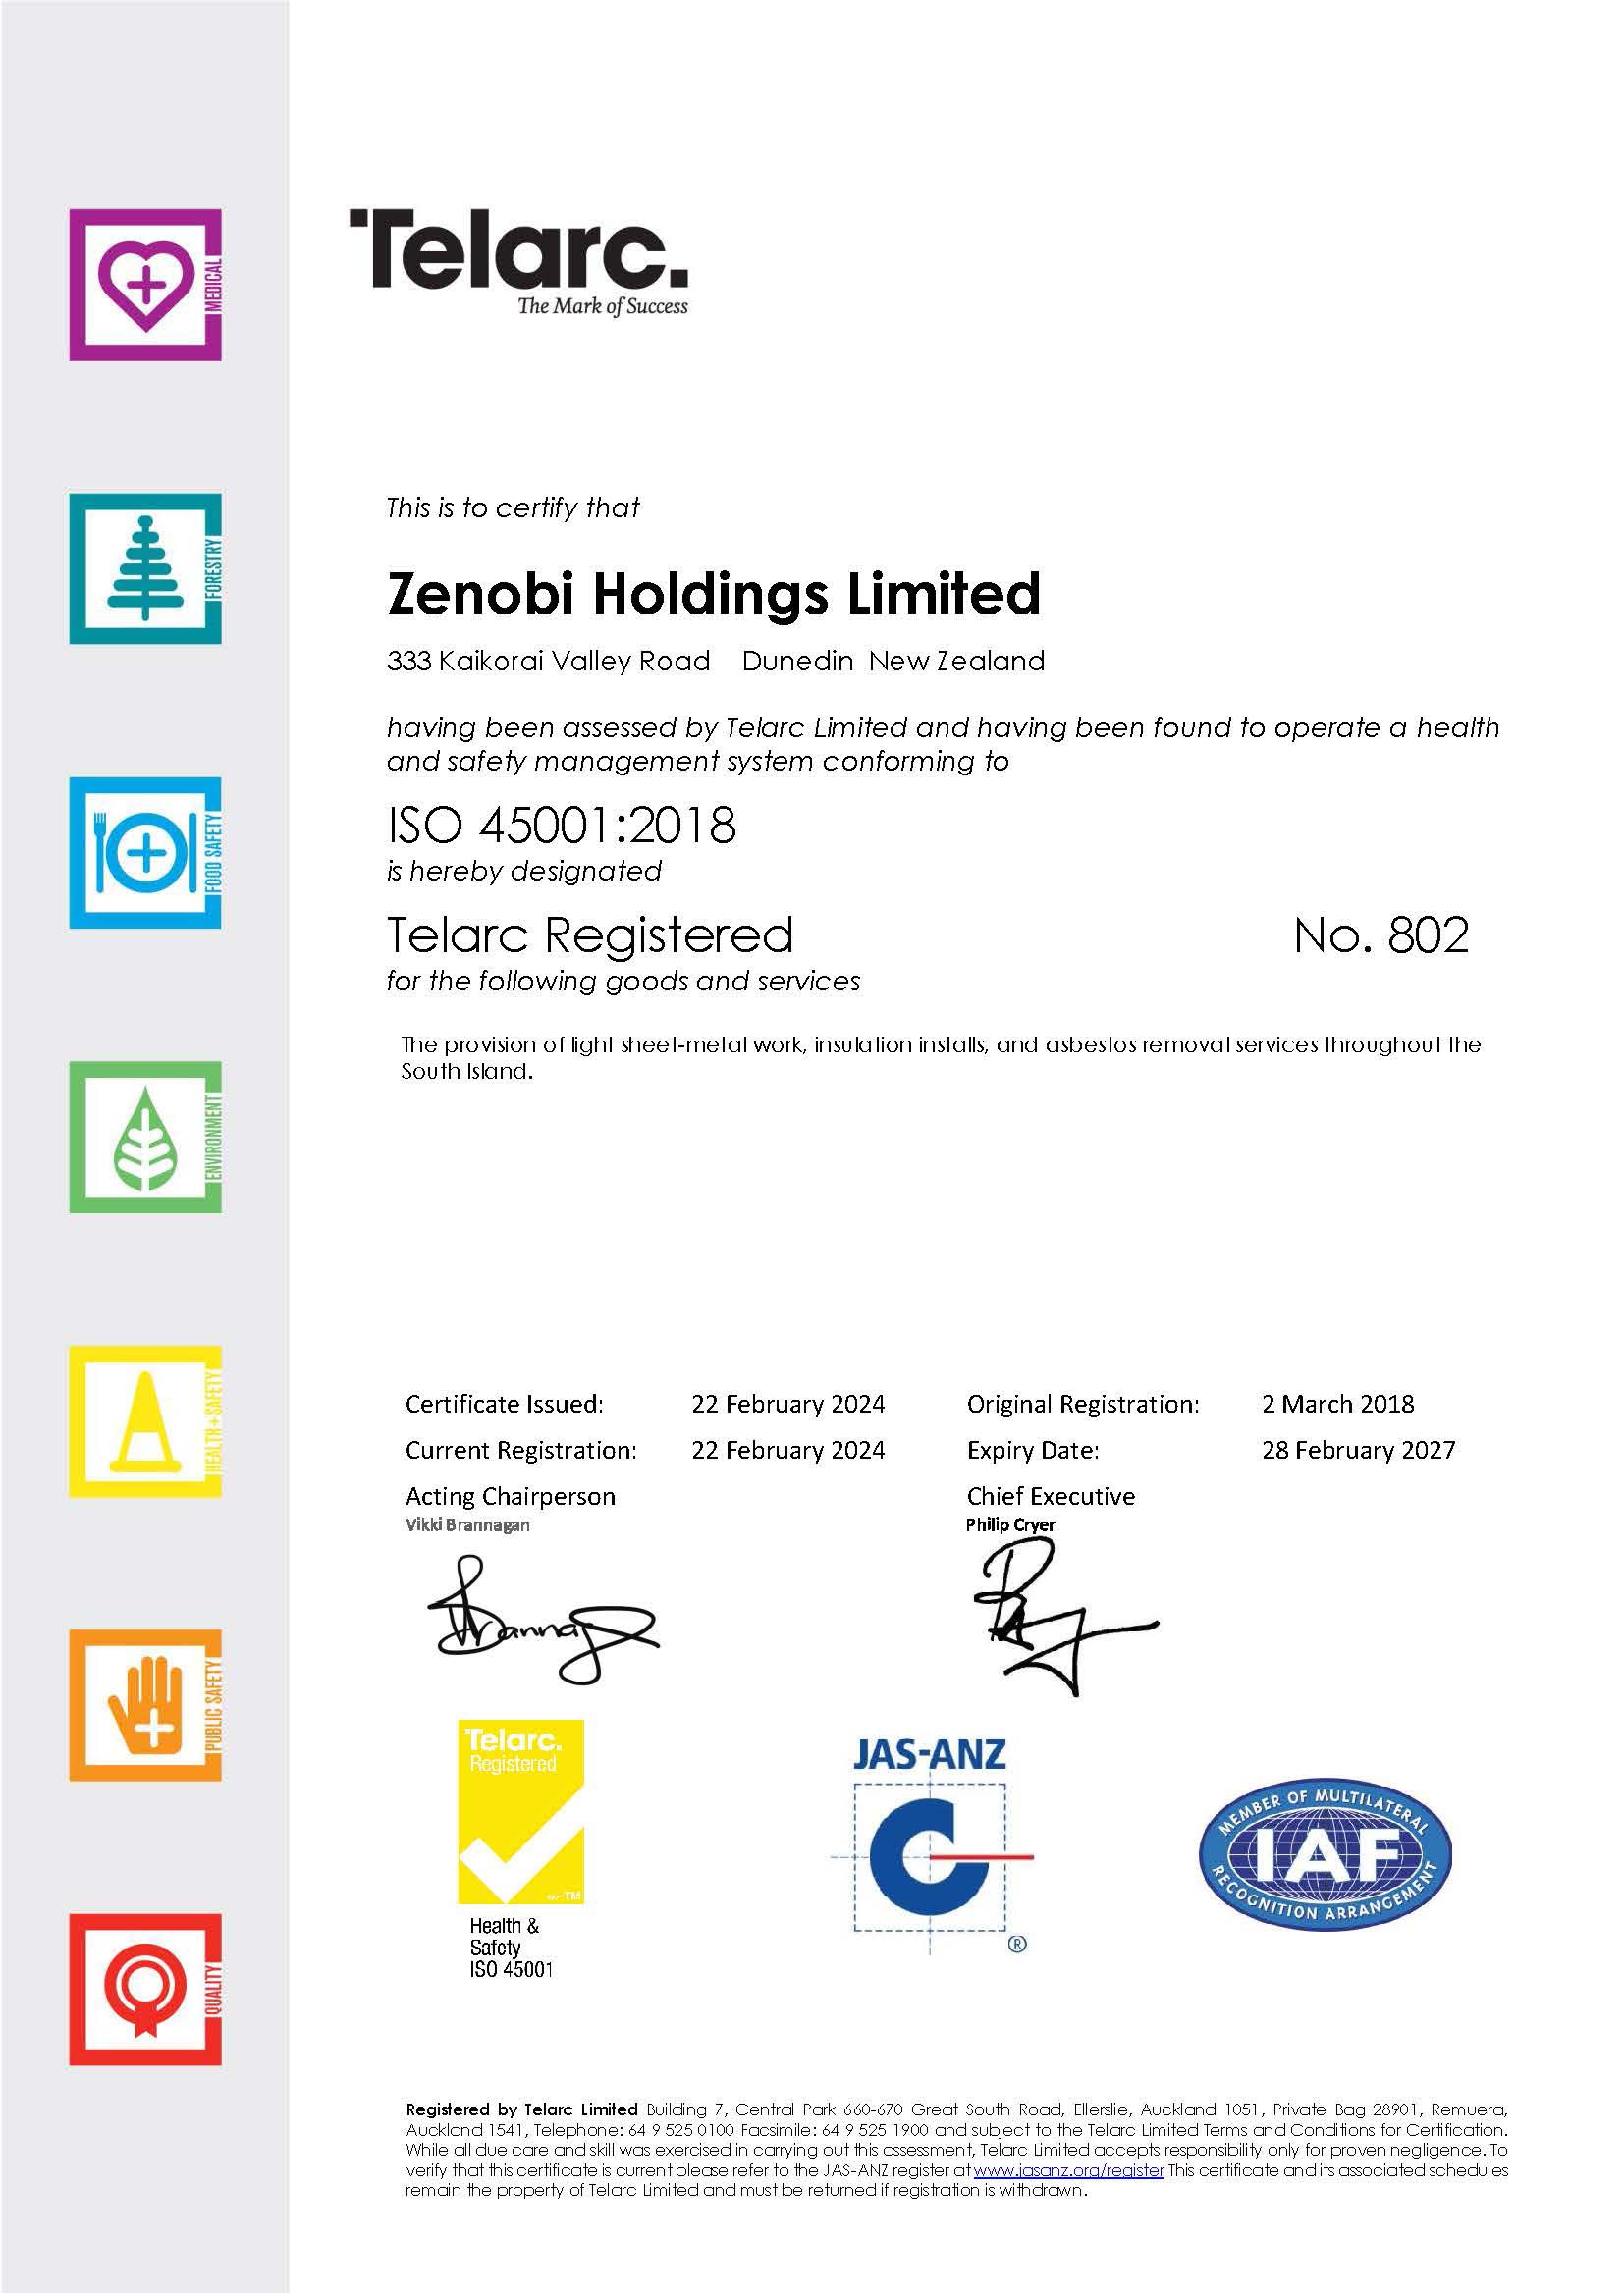 Telarc Health and Safety Management Certificate 2024